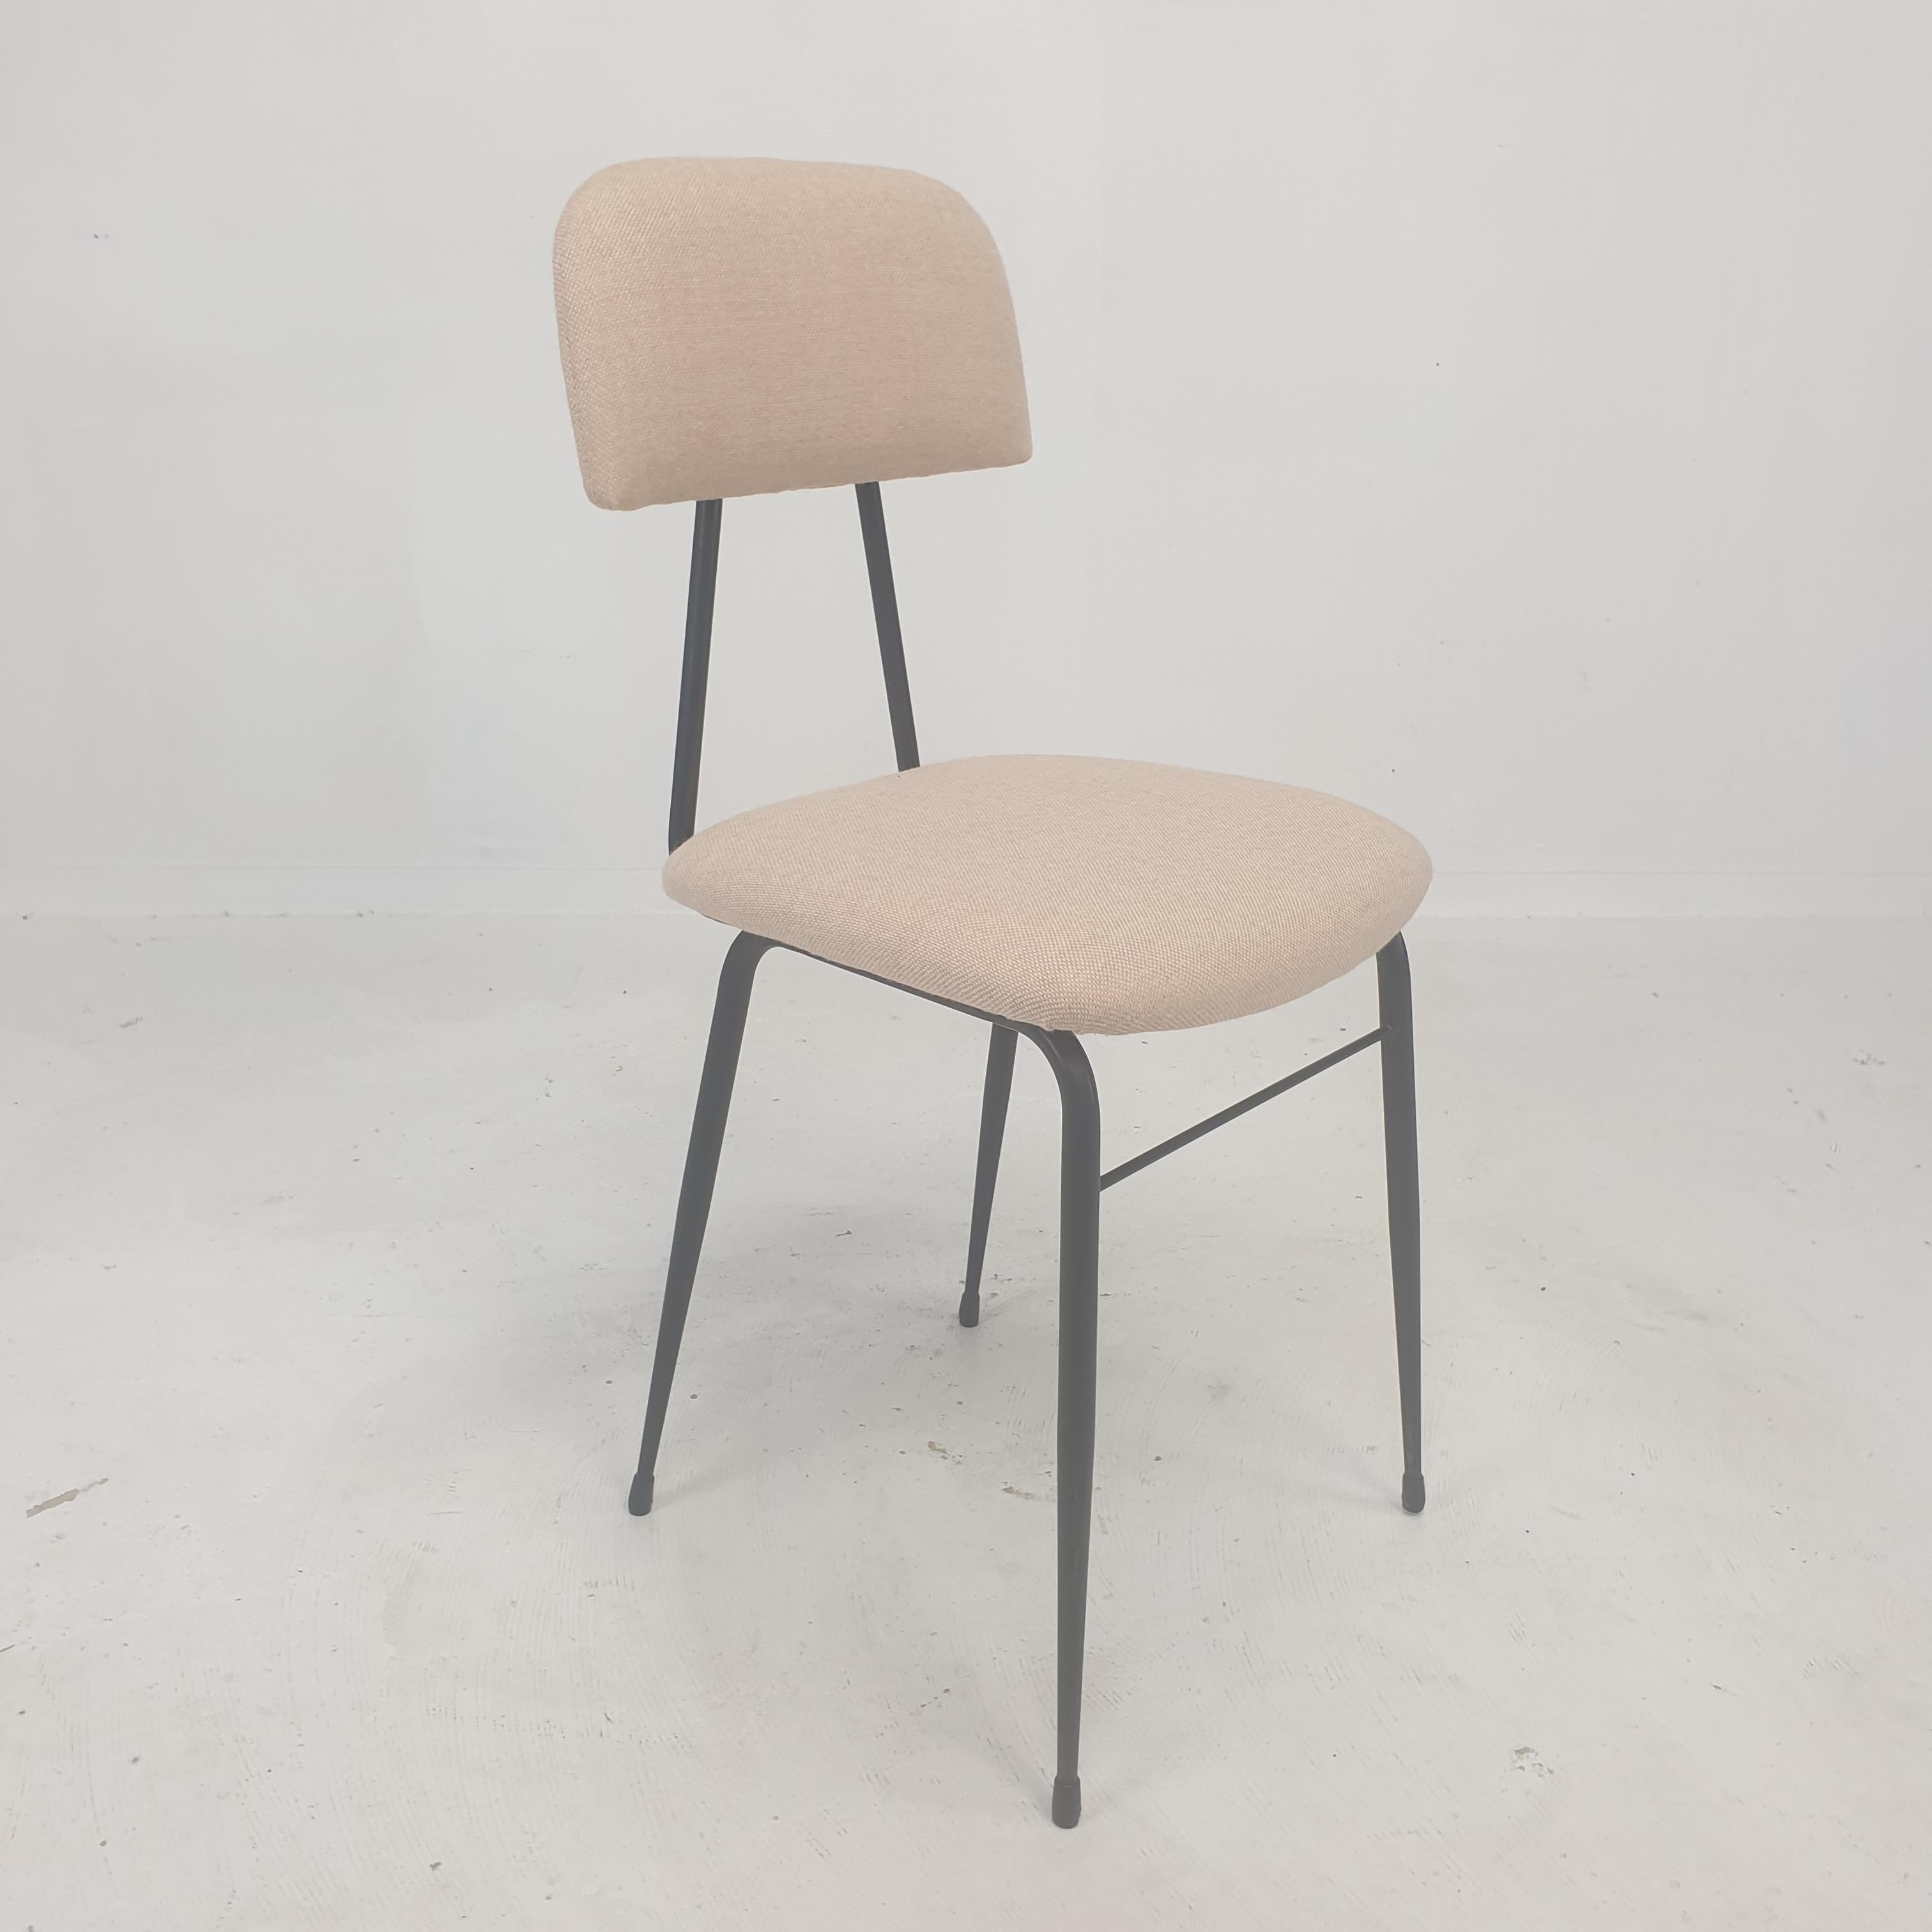 Set of 4 Italian Metal Dining Chairs, 1960's For Sale 5